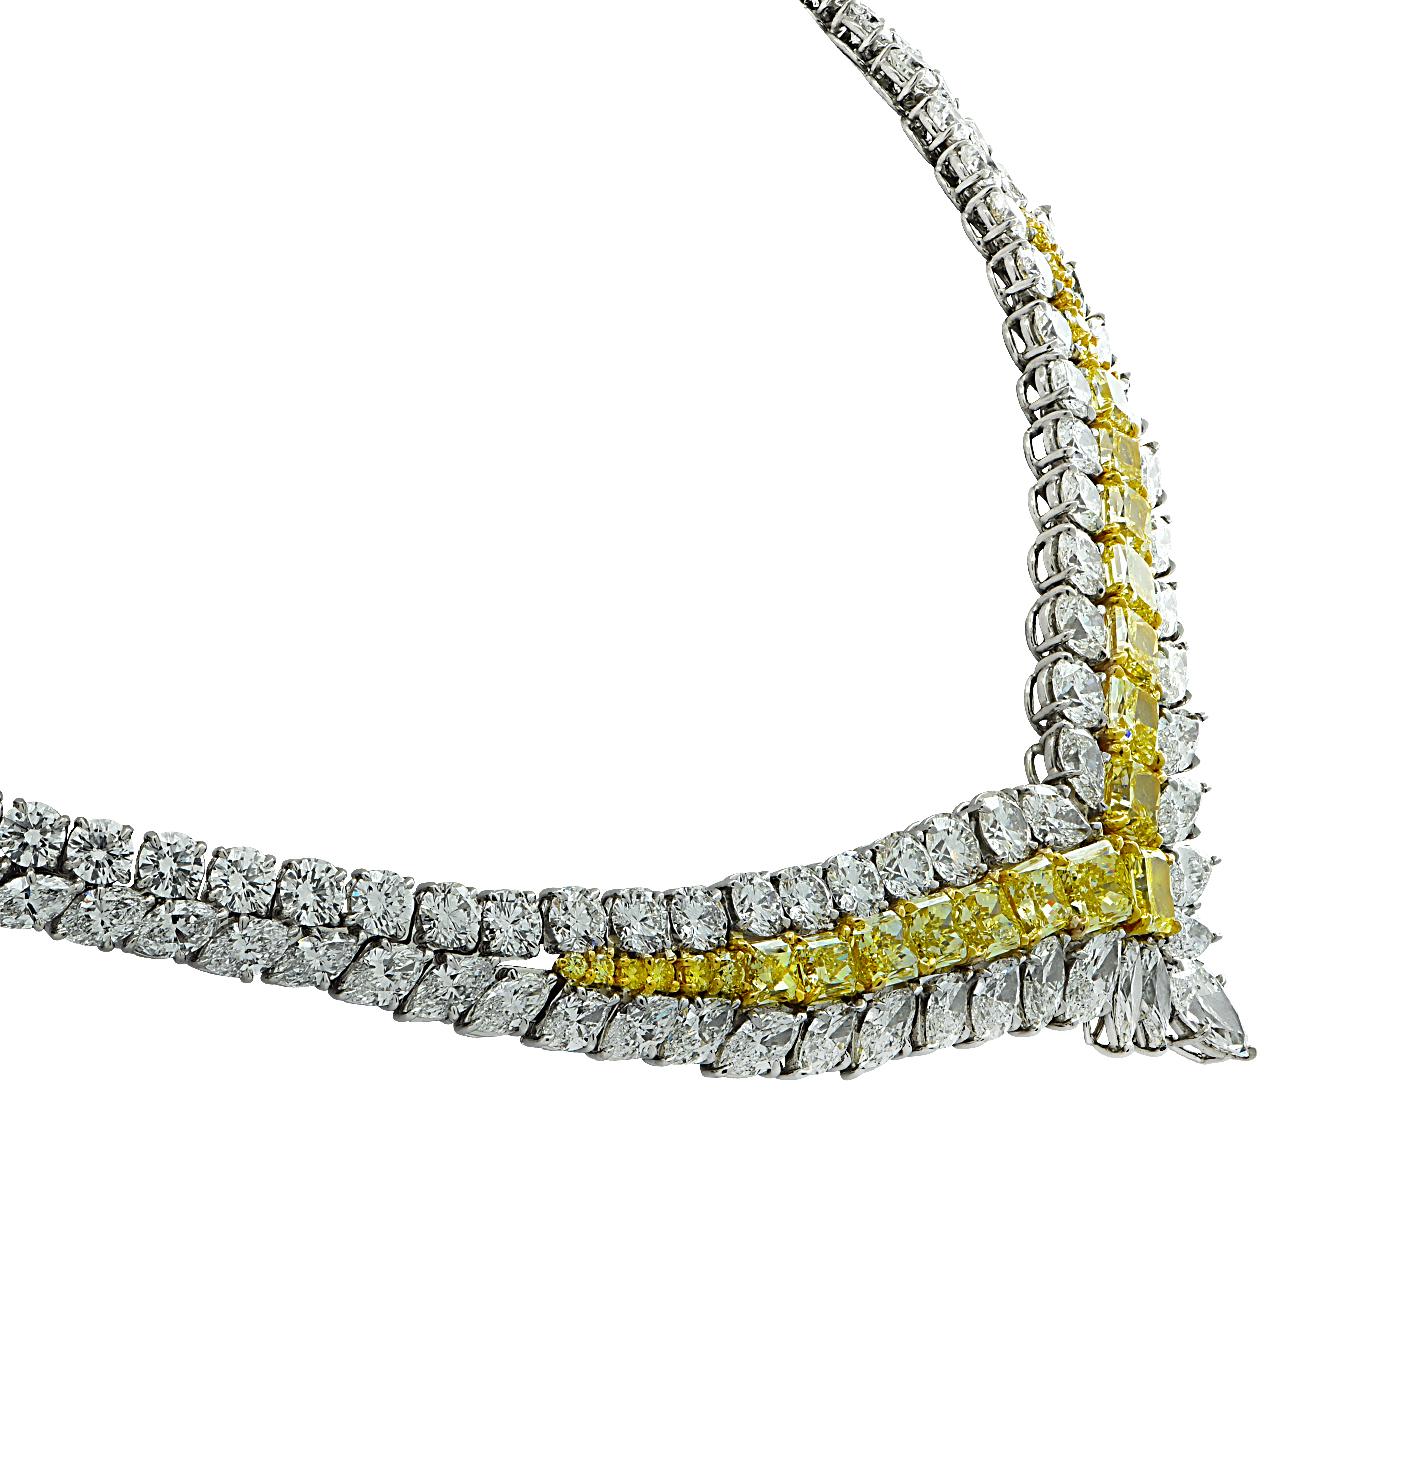 Women's 80.81 Carat GIA Certified Fancy Intense Yellow and White Diamond Necklace For Sale